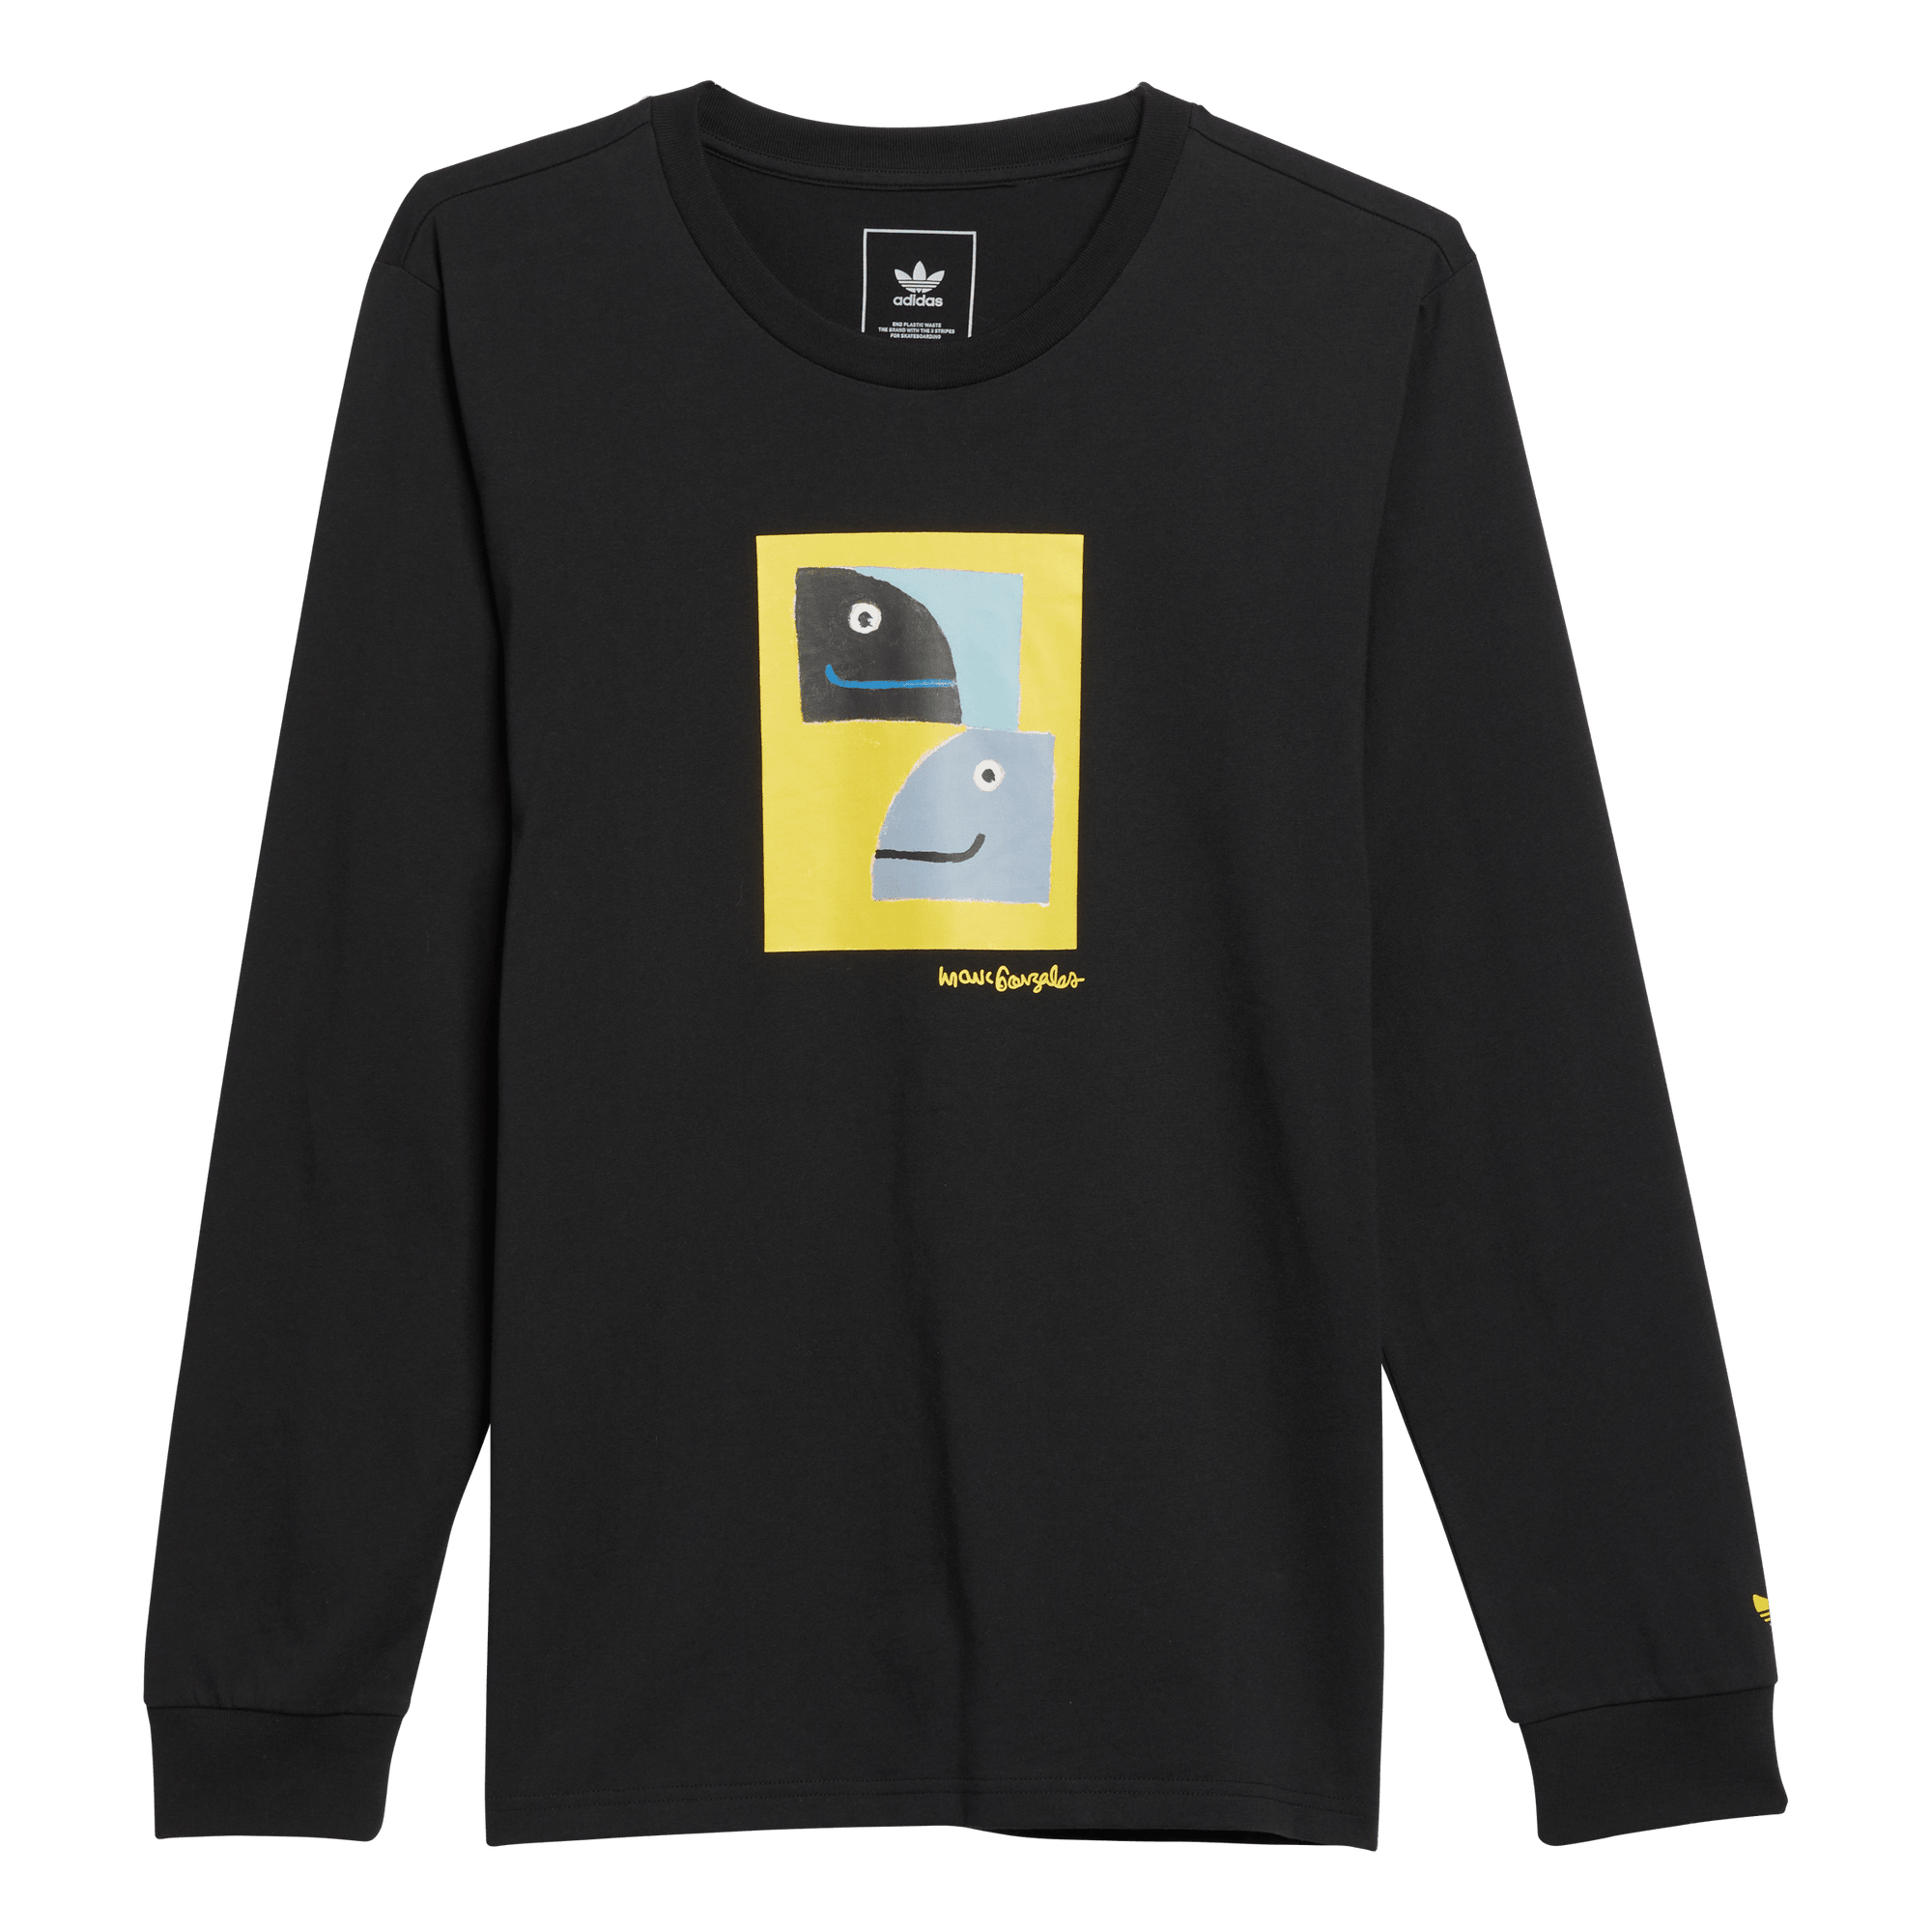 Buy Men's Long Sleeve T-Shirts online in Canada at Freeride Boardshop Page 2